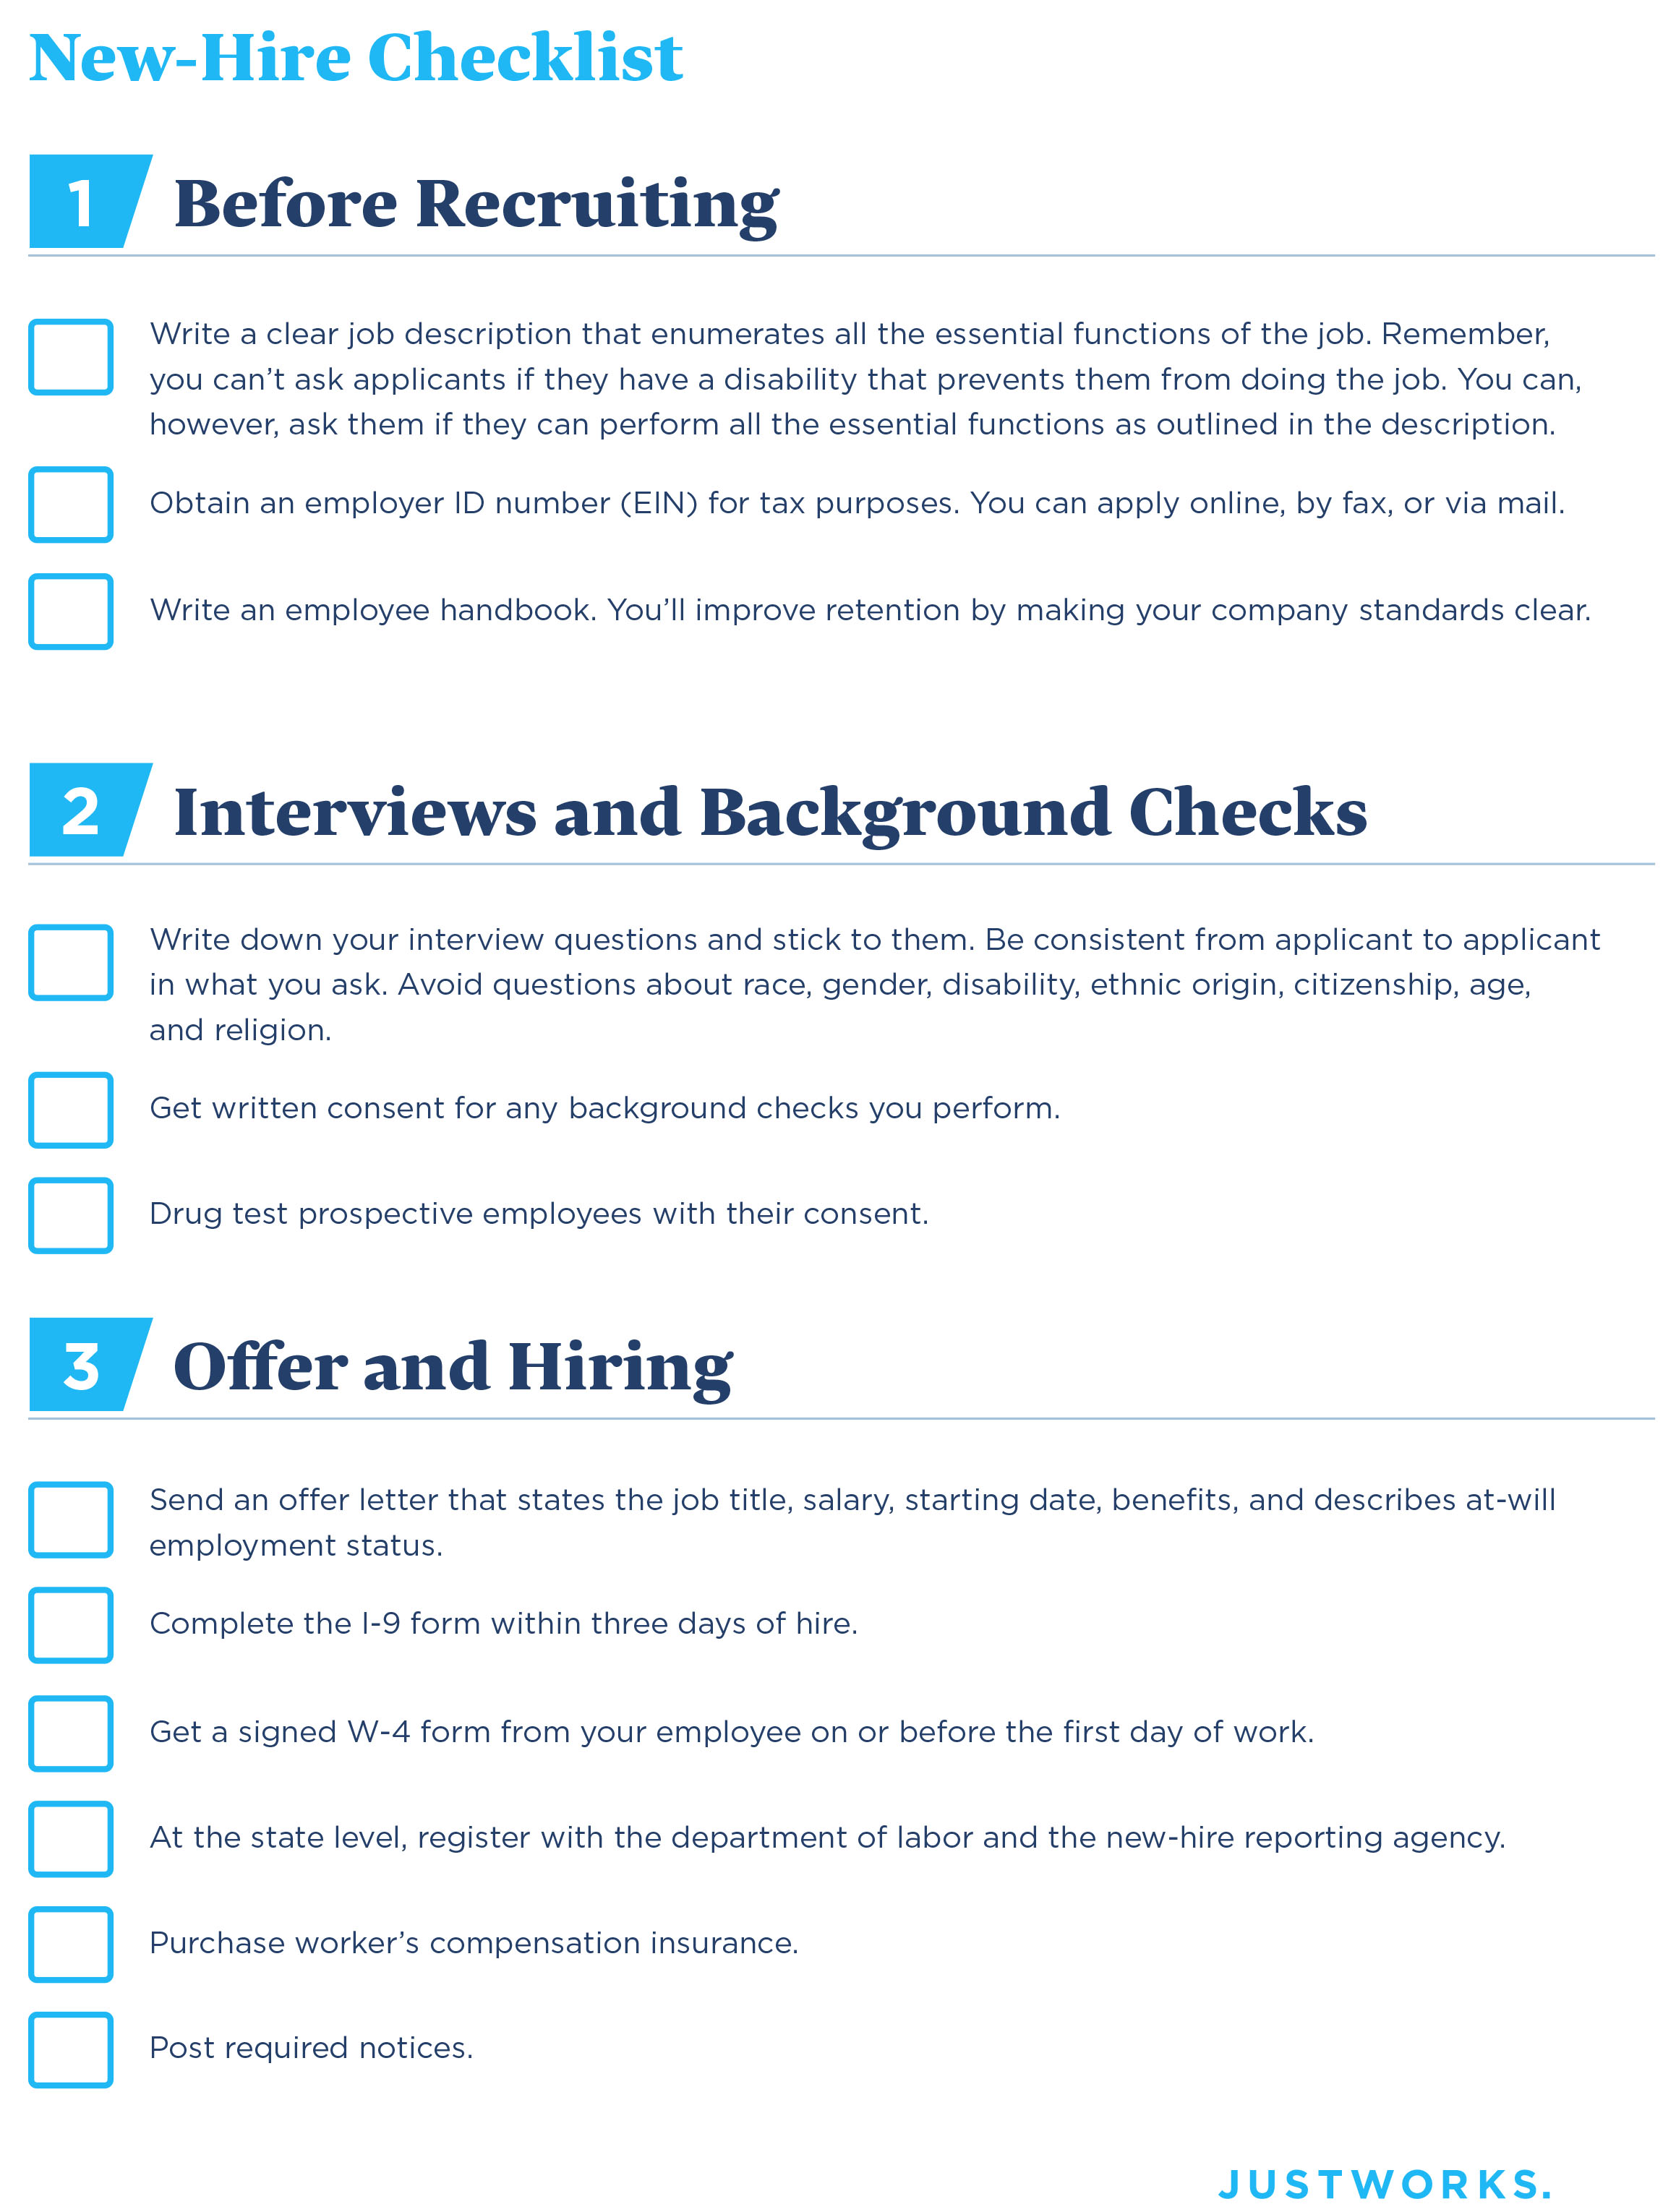 Infographic: A New Hire Checklist To Keep Compliant | Justworks